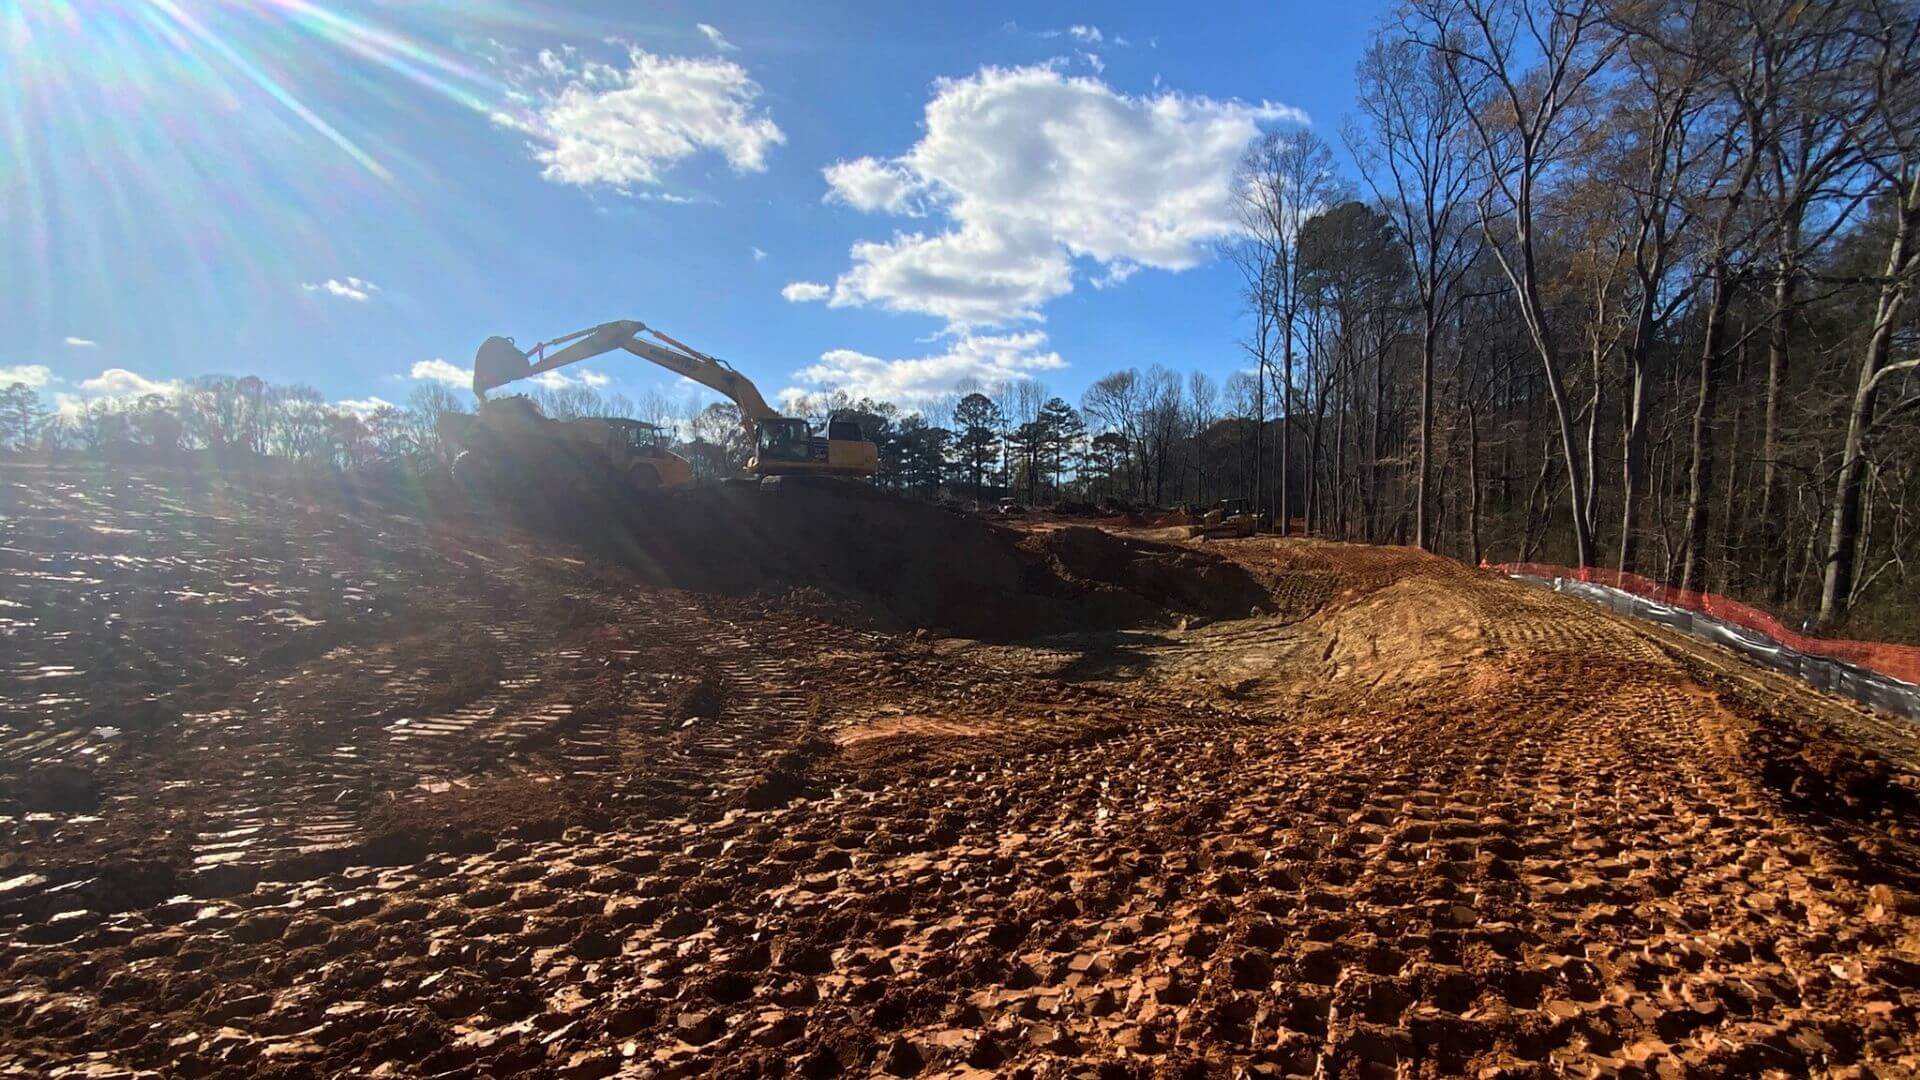 Catamount Constructors breaks ground on 113-unit built-to-rent project in Alpharetta called The Hayloft Cottages - Big Creek